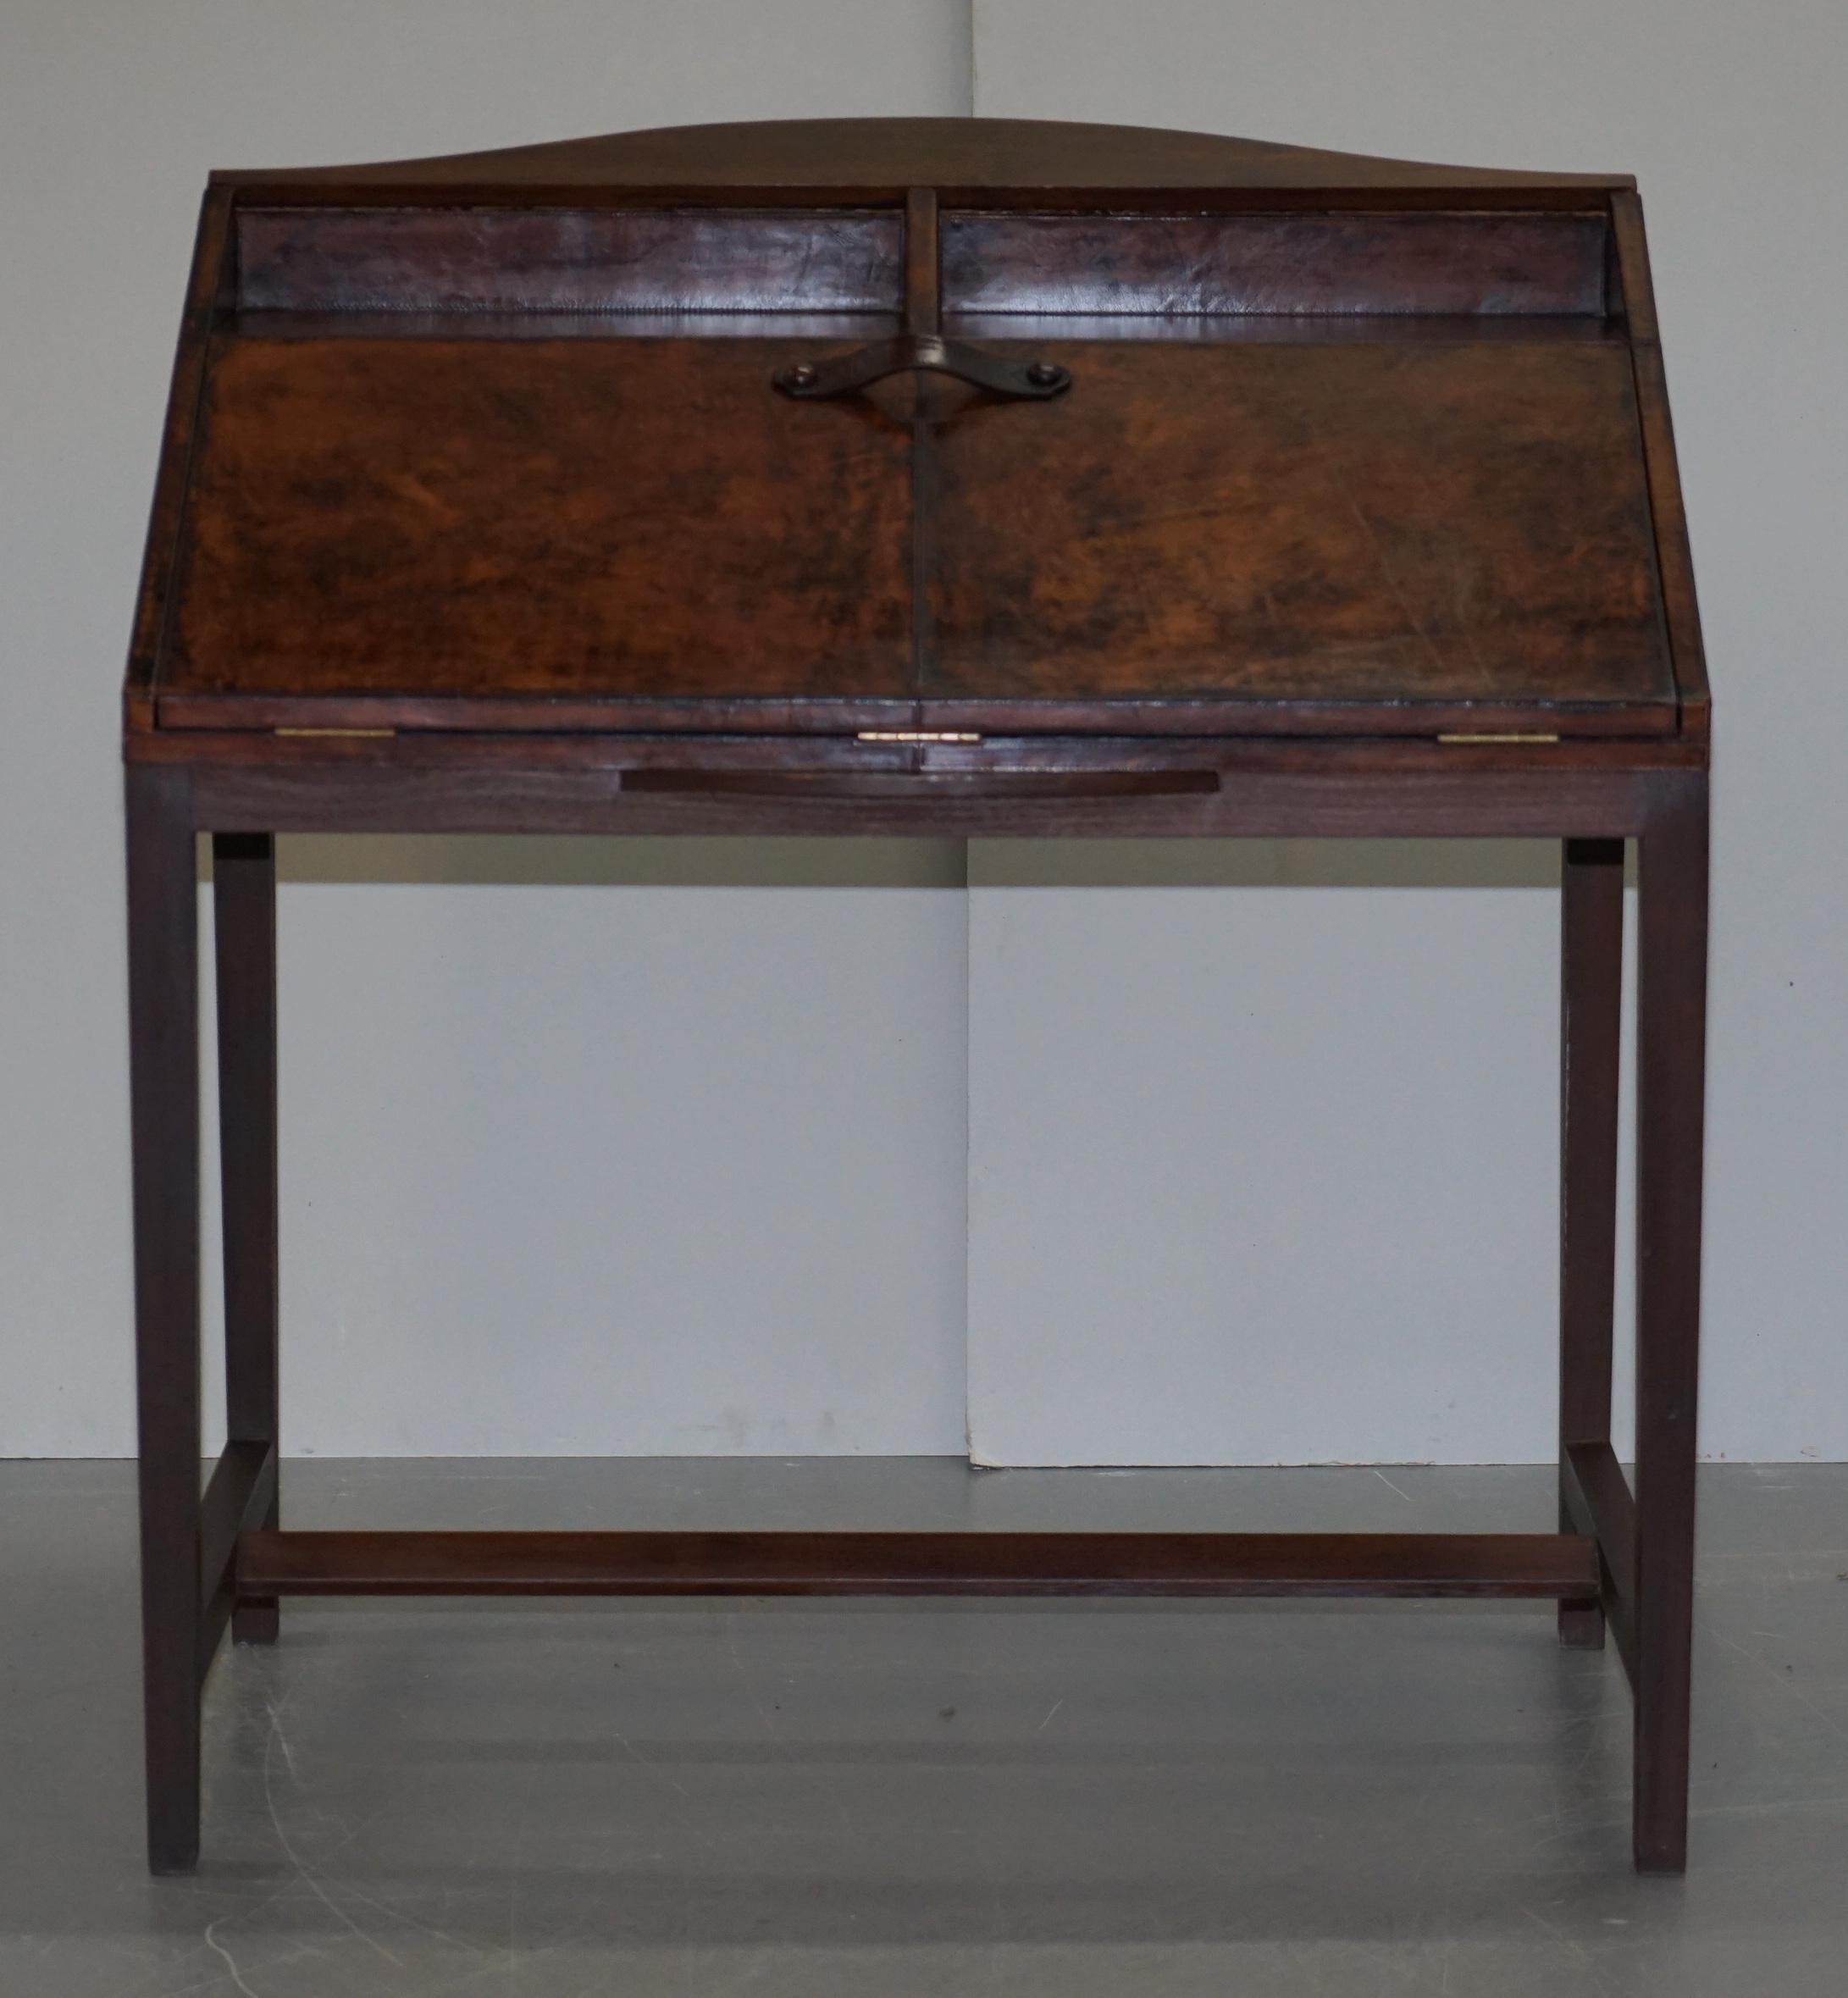 We are delighted to this lovely brown leather upholstered writing bureau desk with drop front and twin drawers inside

A good looking and well-made desk, I can’t see a sign of use on it anywhere, it looks new

We have cleaned waxed and polished